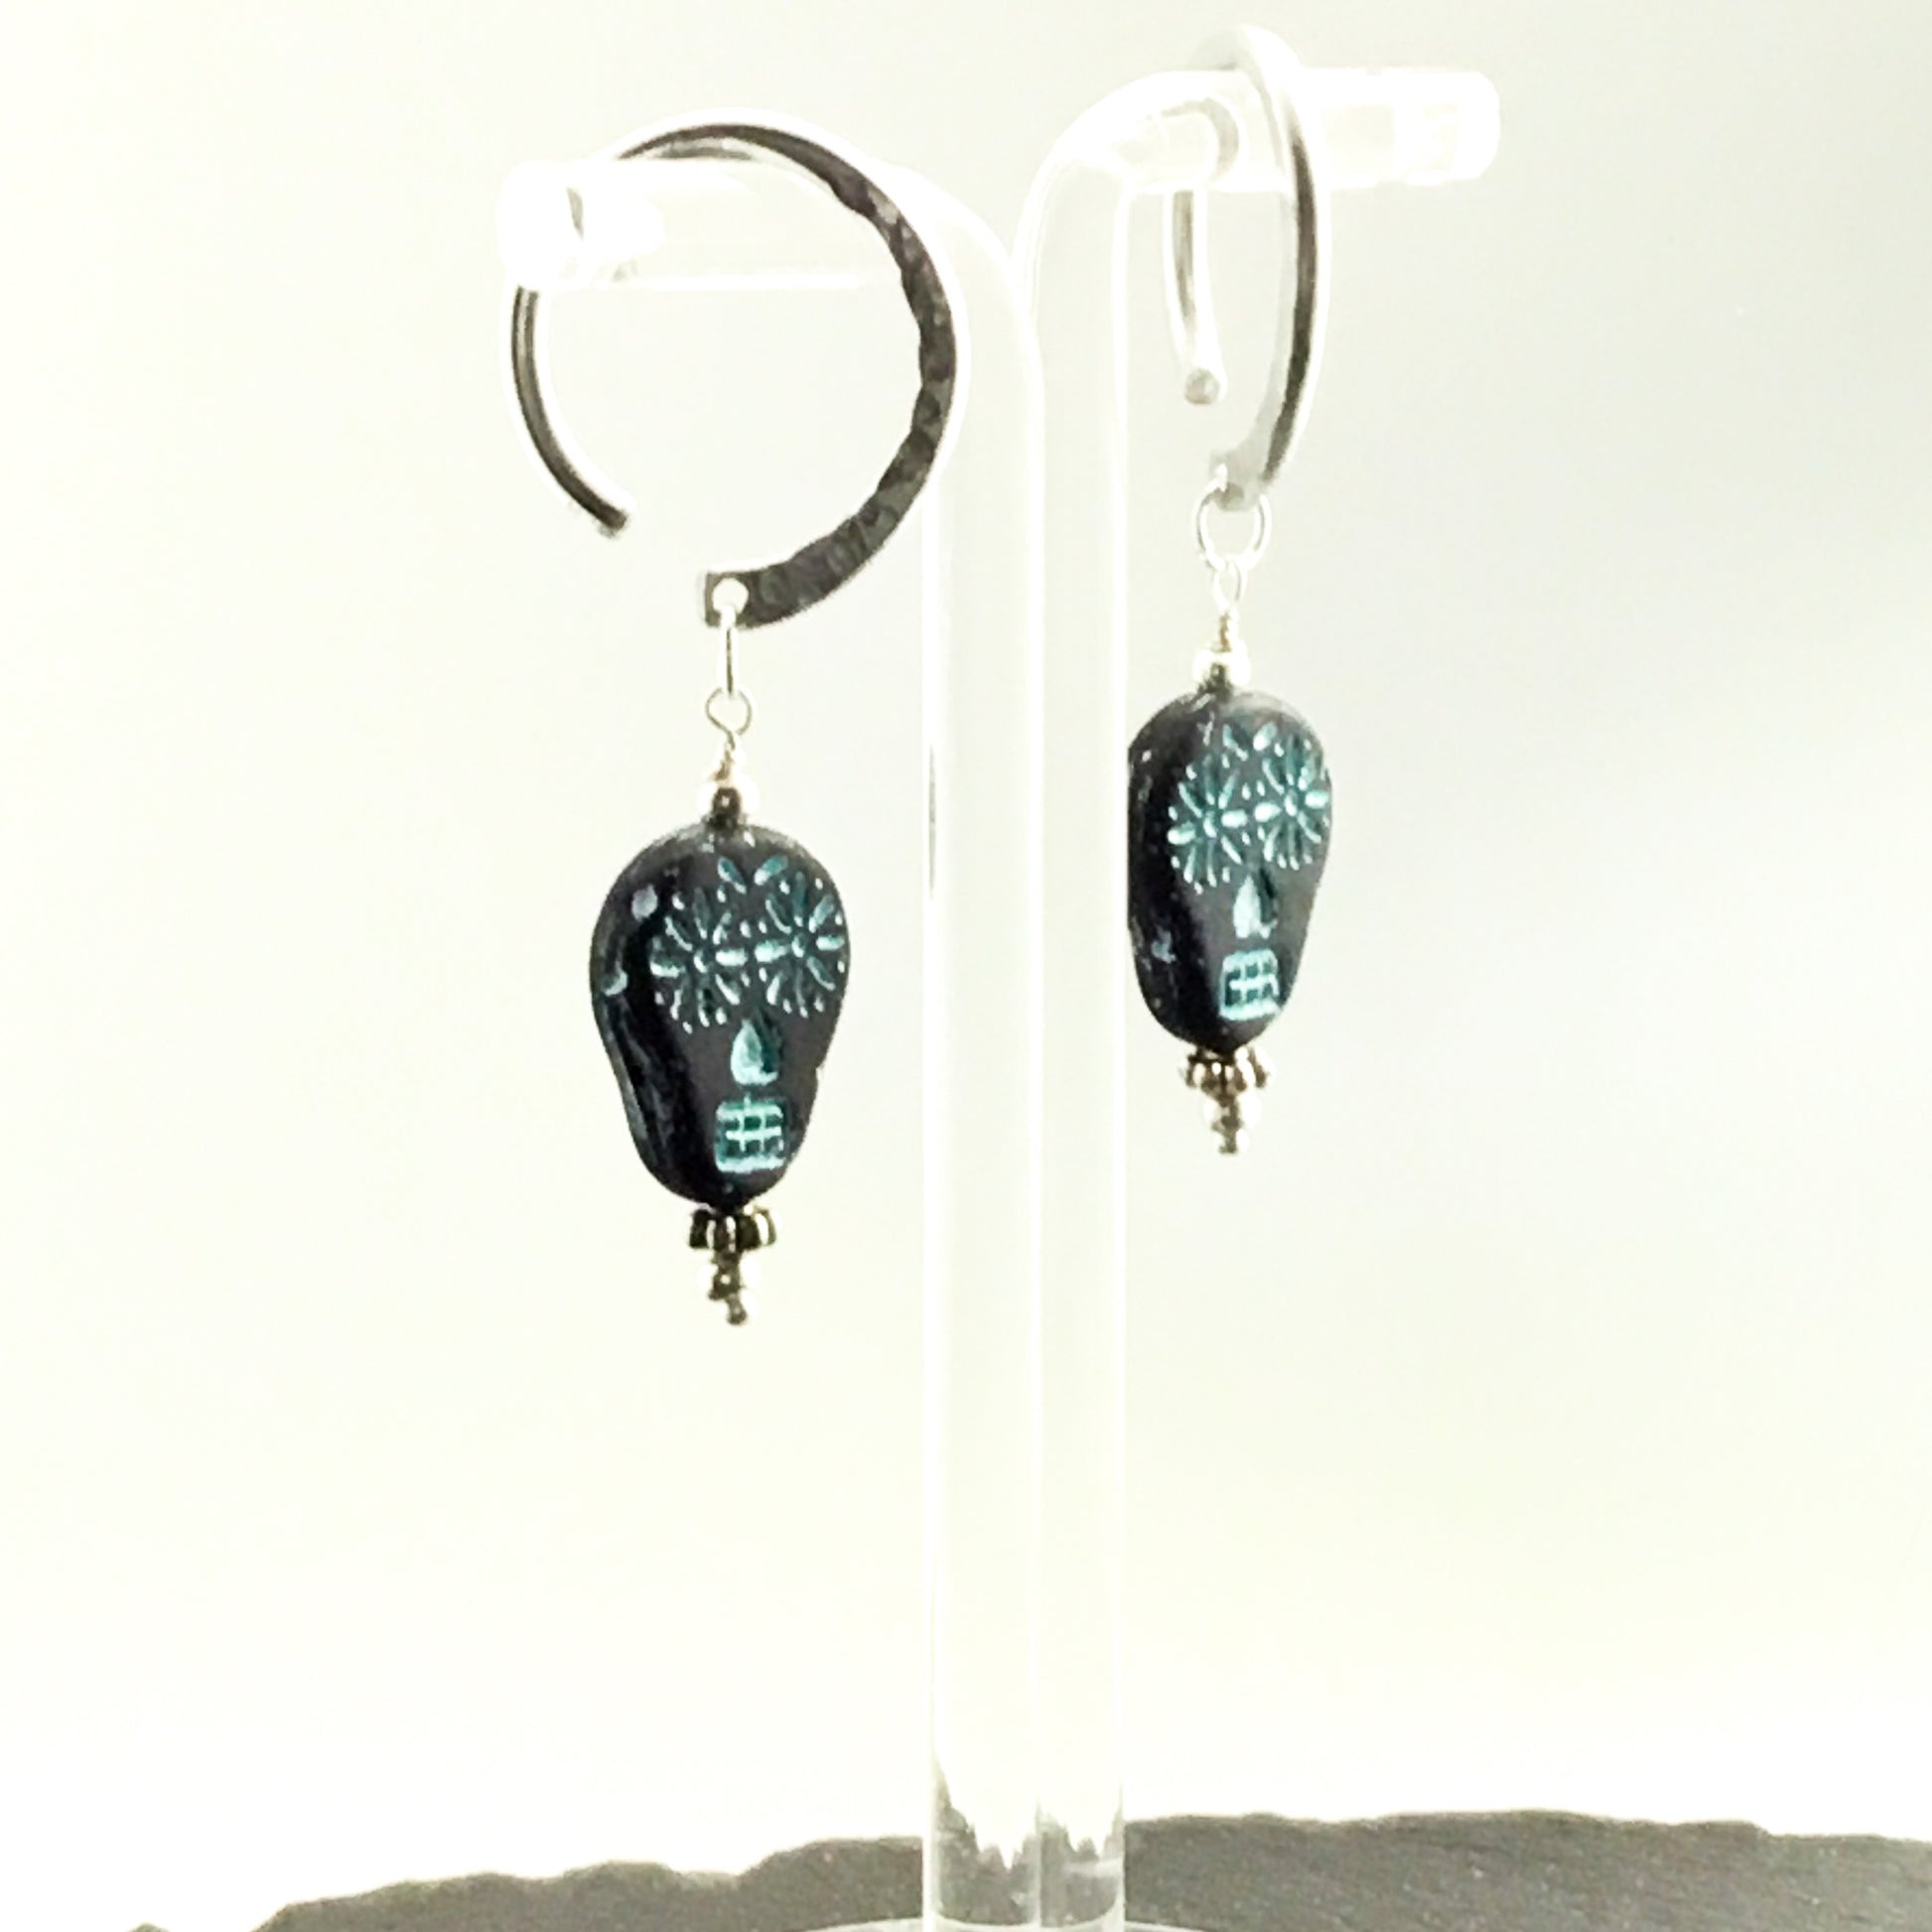 Sugar Skull Earrings for Stretched Ears. Black & Turquoise Matte Glass Skulls. Hand-forged Ear-Wires - Darkmoon Fayre